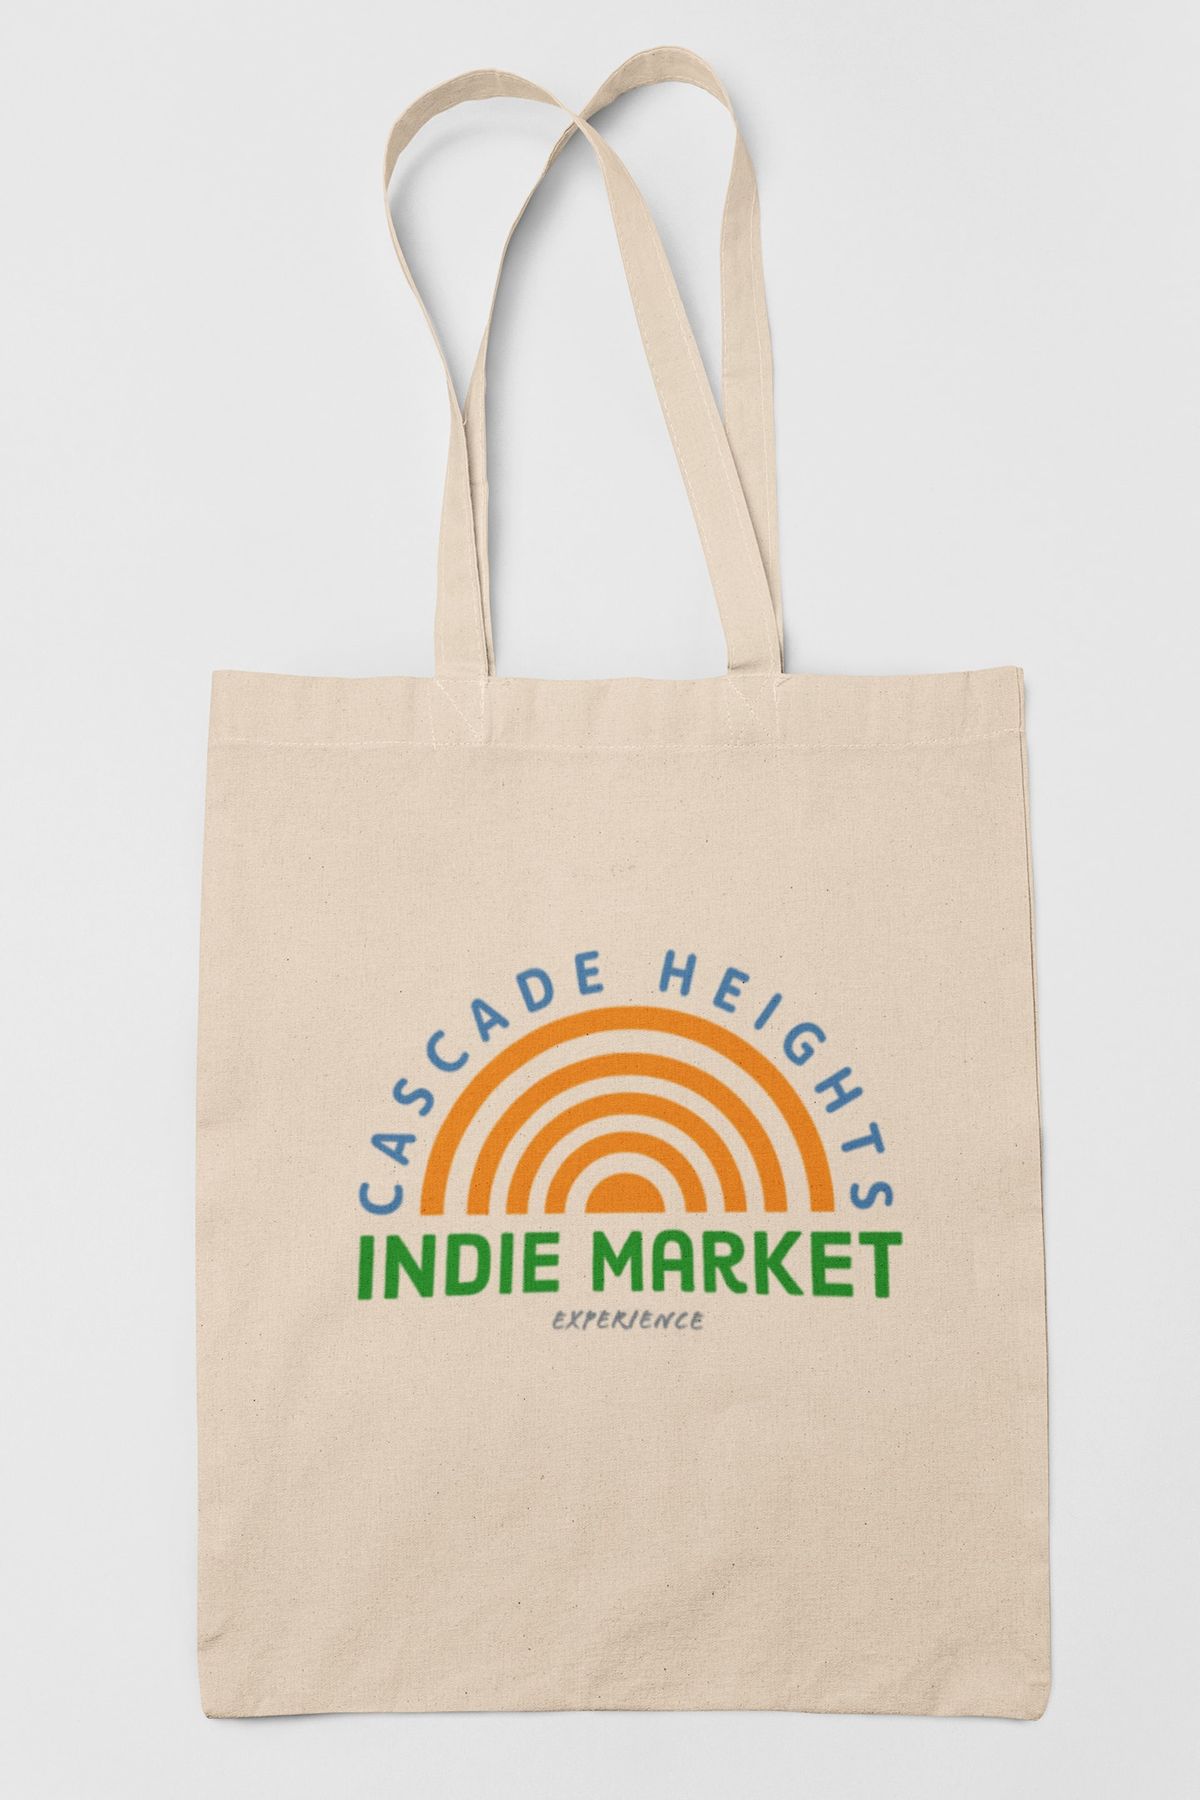 Cascade Heights Indie Market Experience